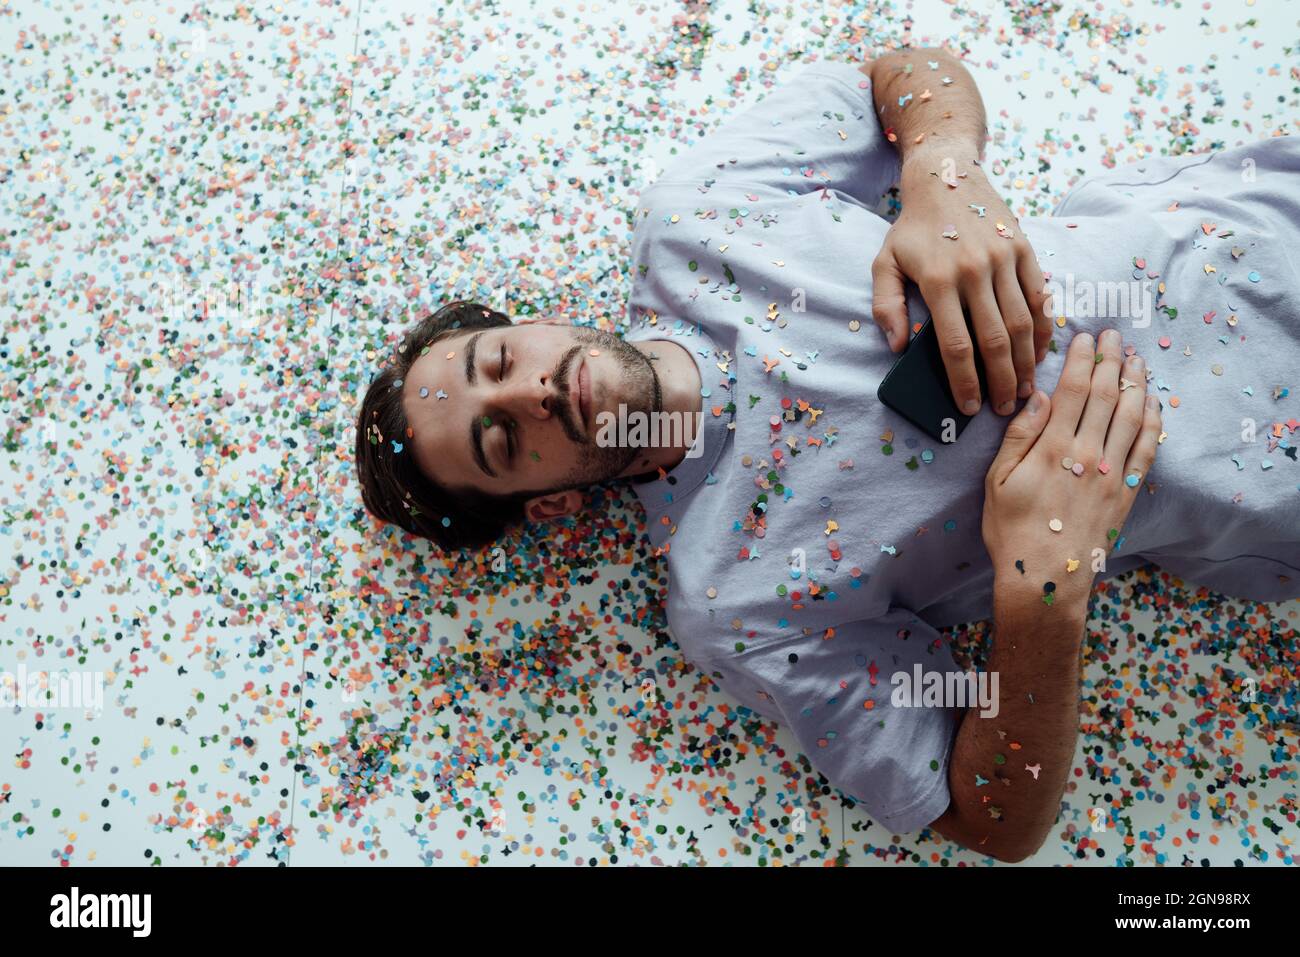 Young man relaxing on floor with confetti Stock Photo